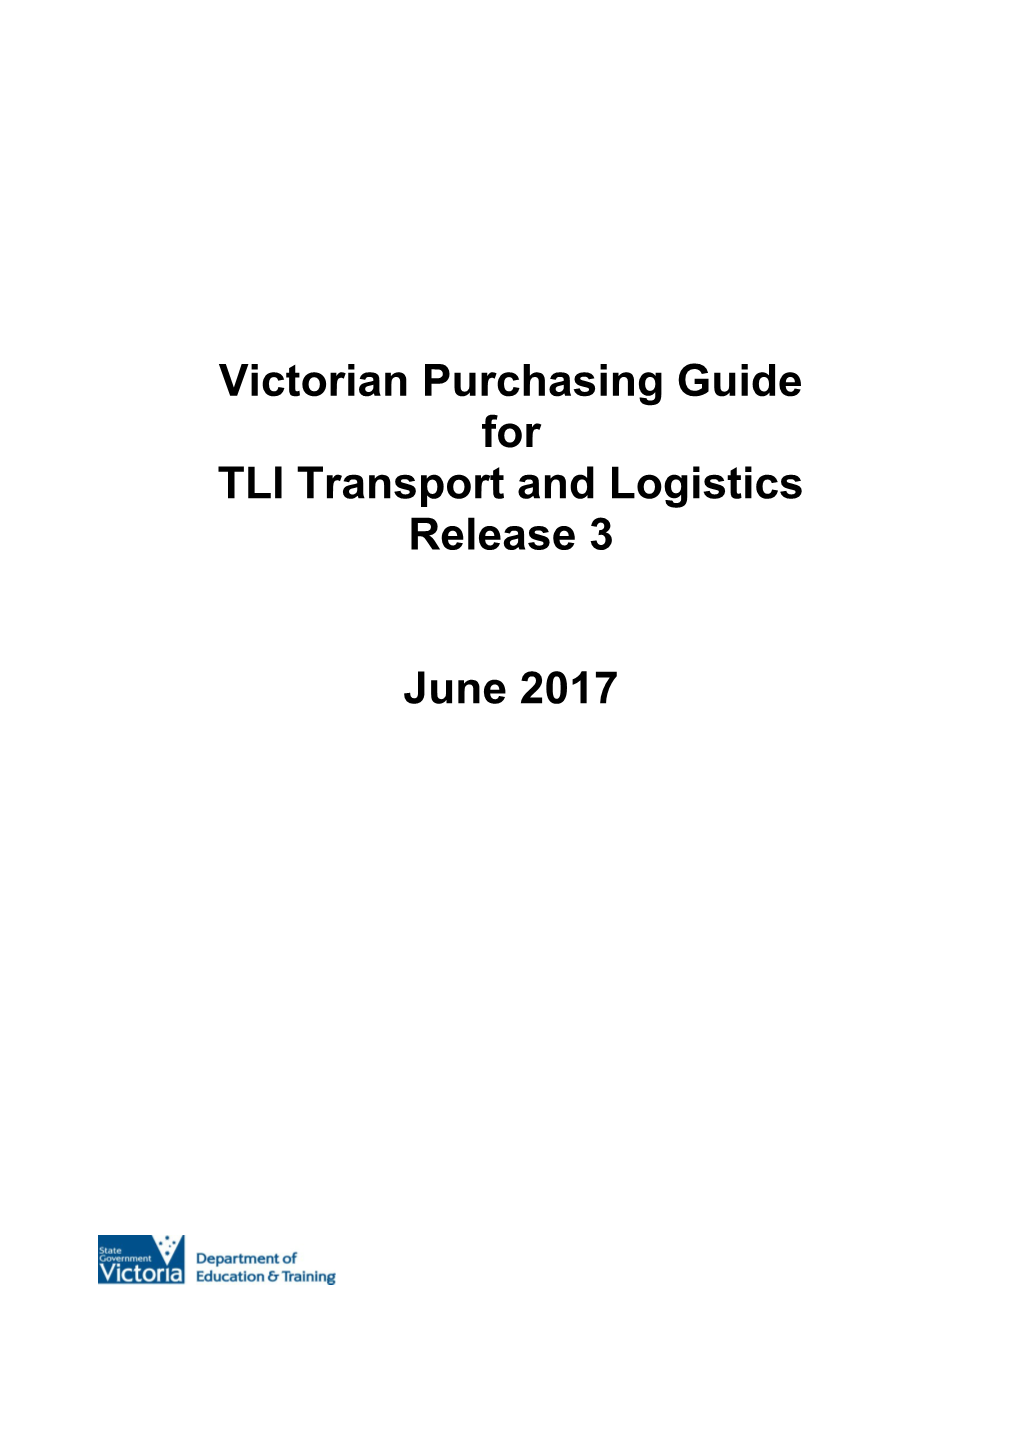 Victorian Purchasing Guide for TLI Transport and Logistics